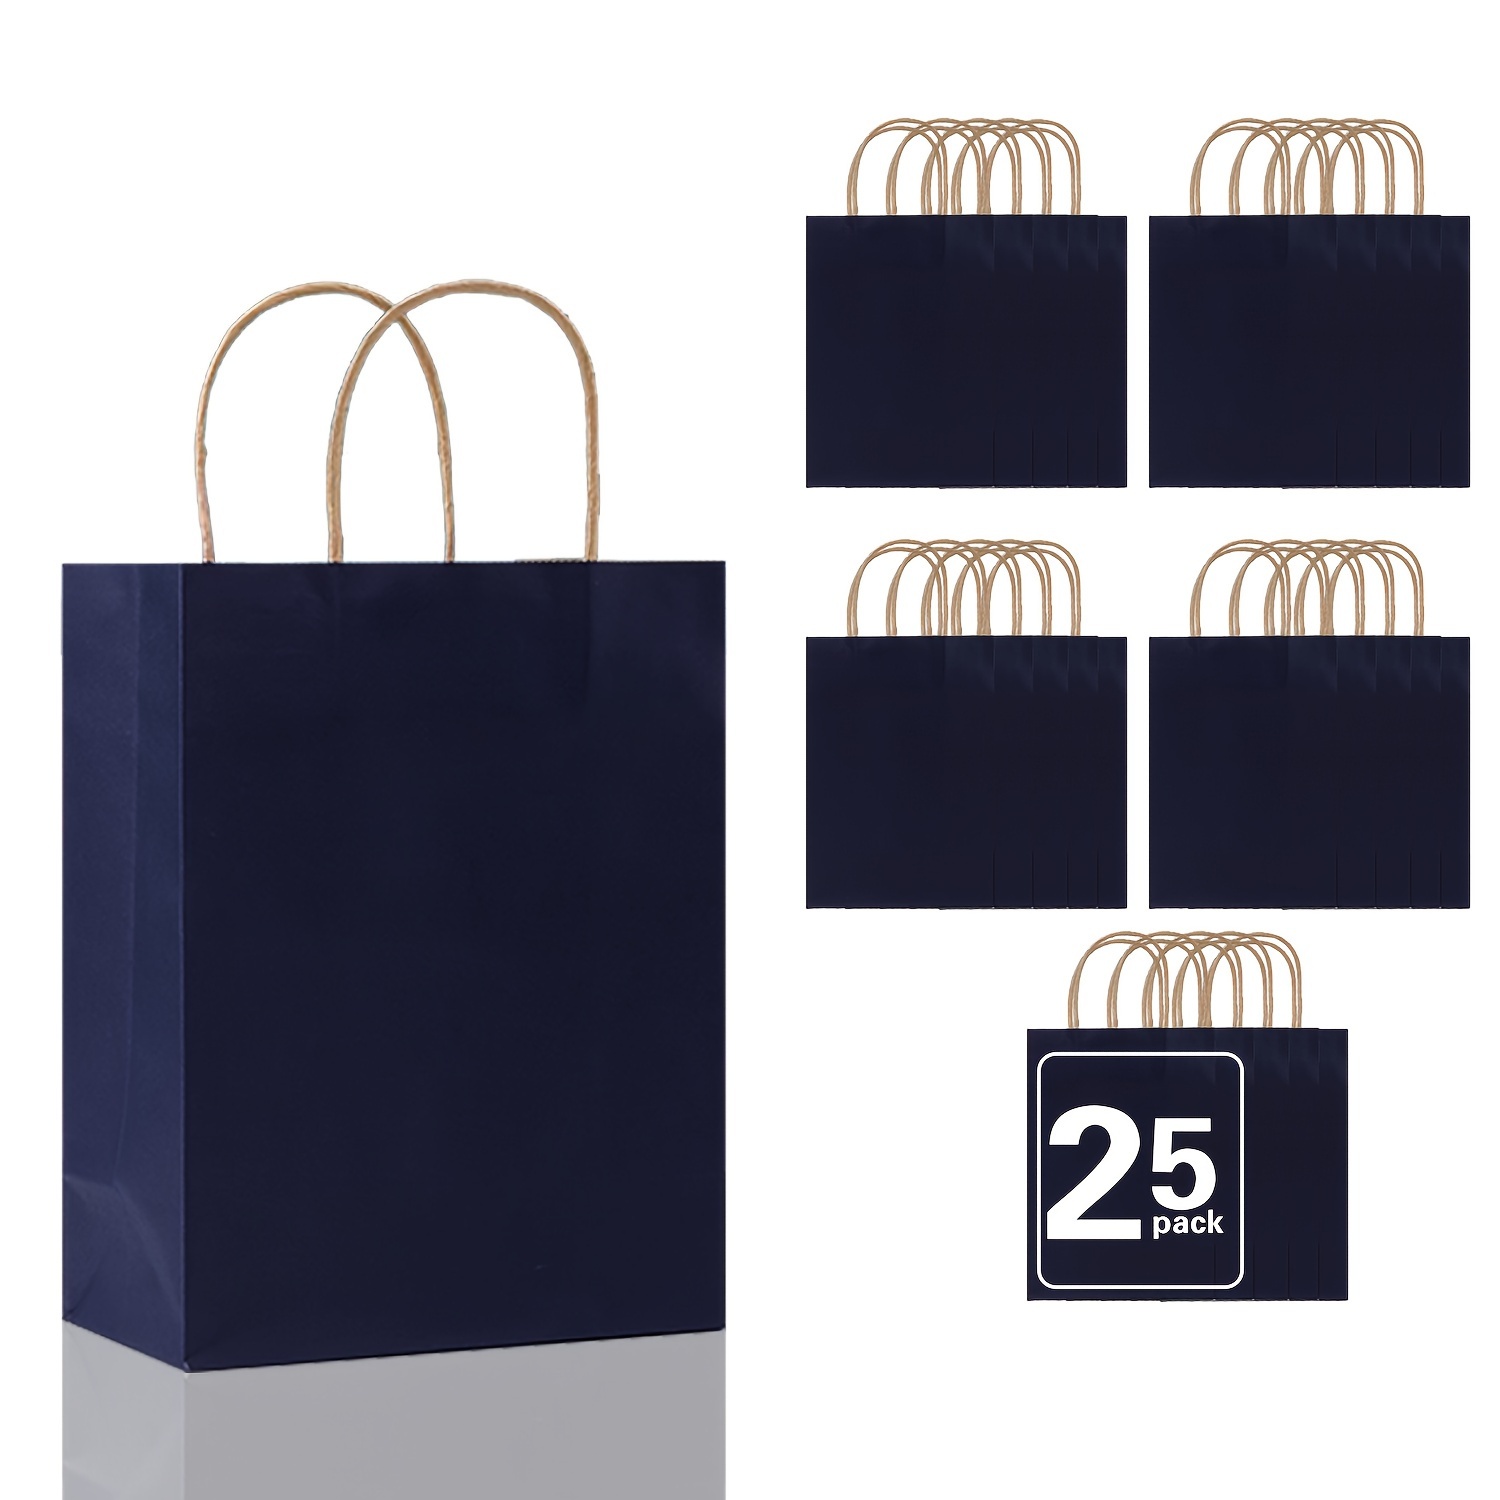 

unique Theme" Elegant Deep Blue Gift Bags - Perfect For Weddings, Birthdays & Special Occasions | Versatile Candy & Present Pouches